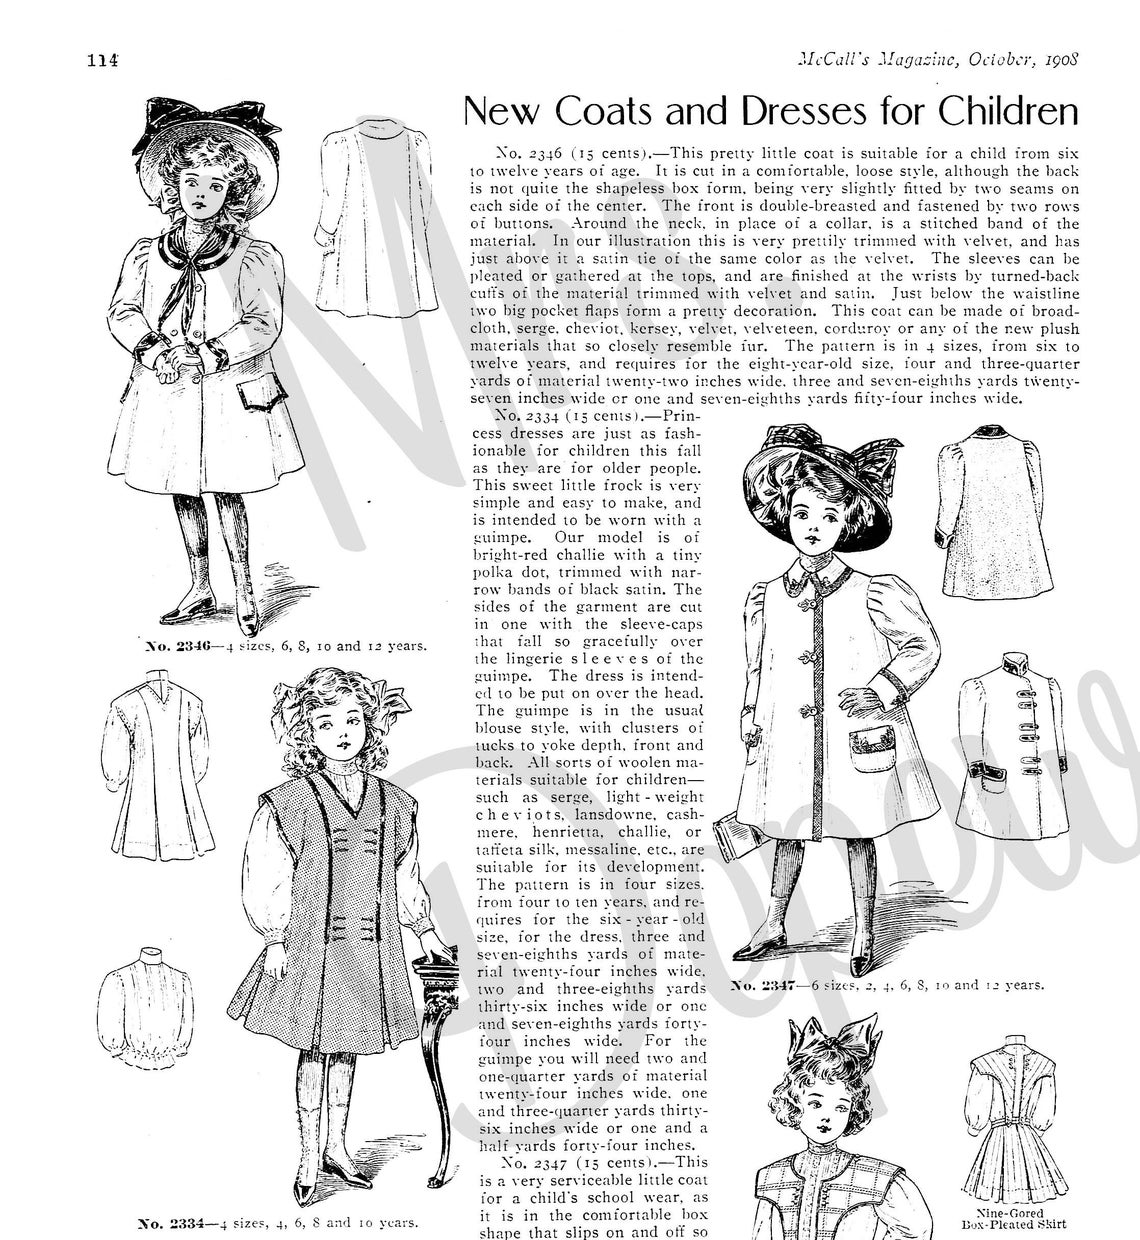 October 1908 Mccall's Magazine Advertising Sewing Patterns - Etsy